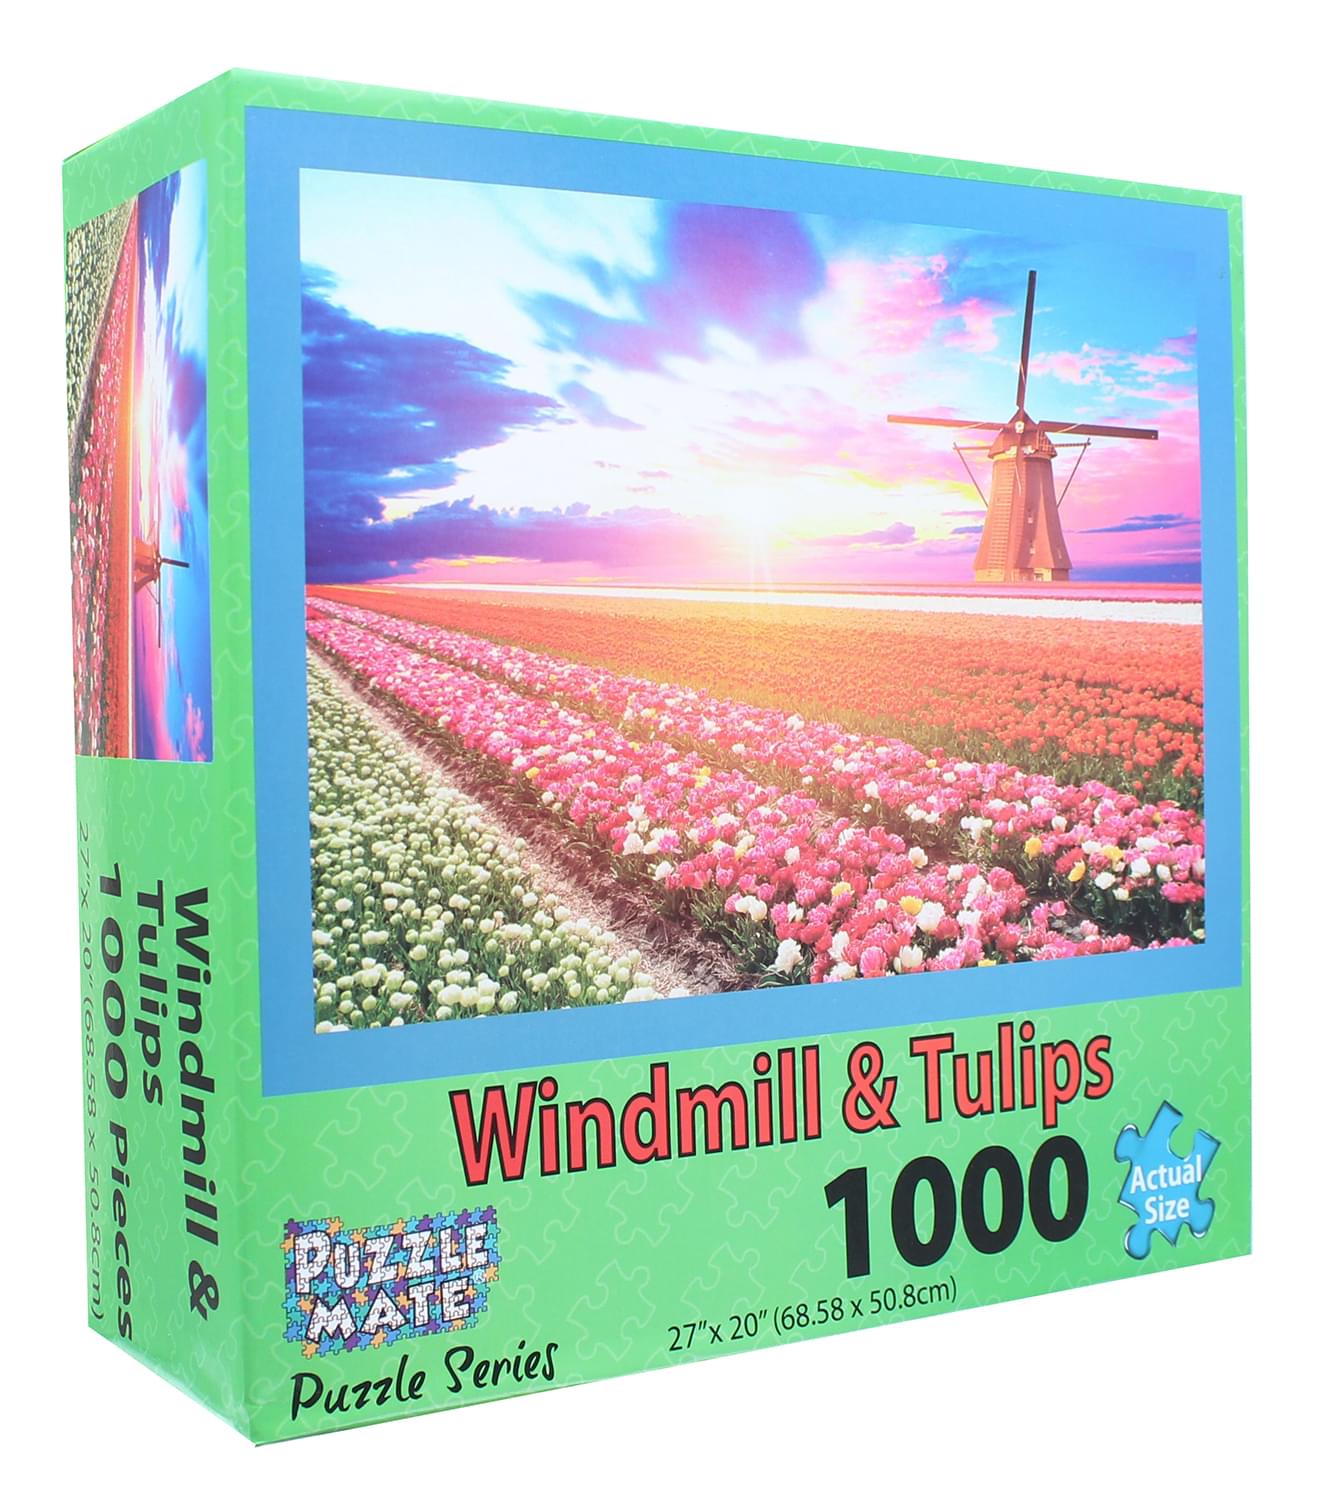 Windmill and Tulips 1000 Piece Jigsaw Puzzle